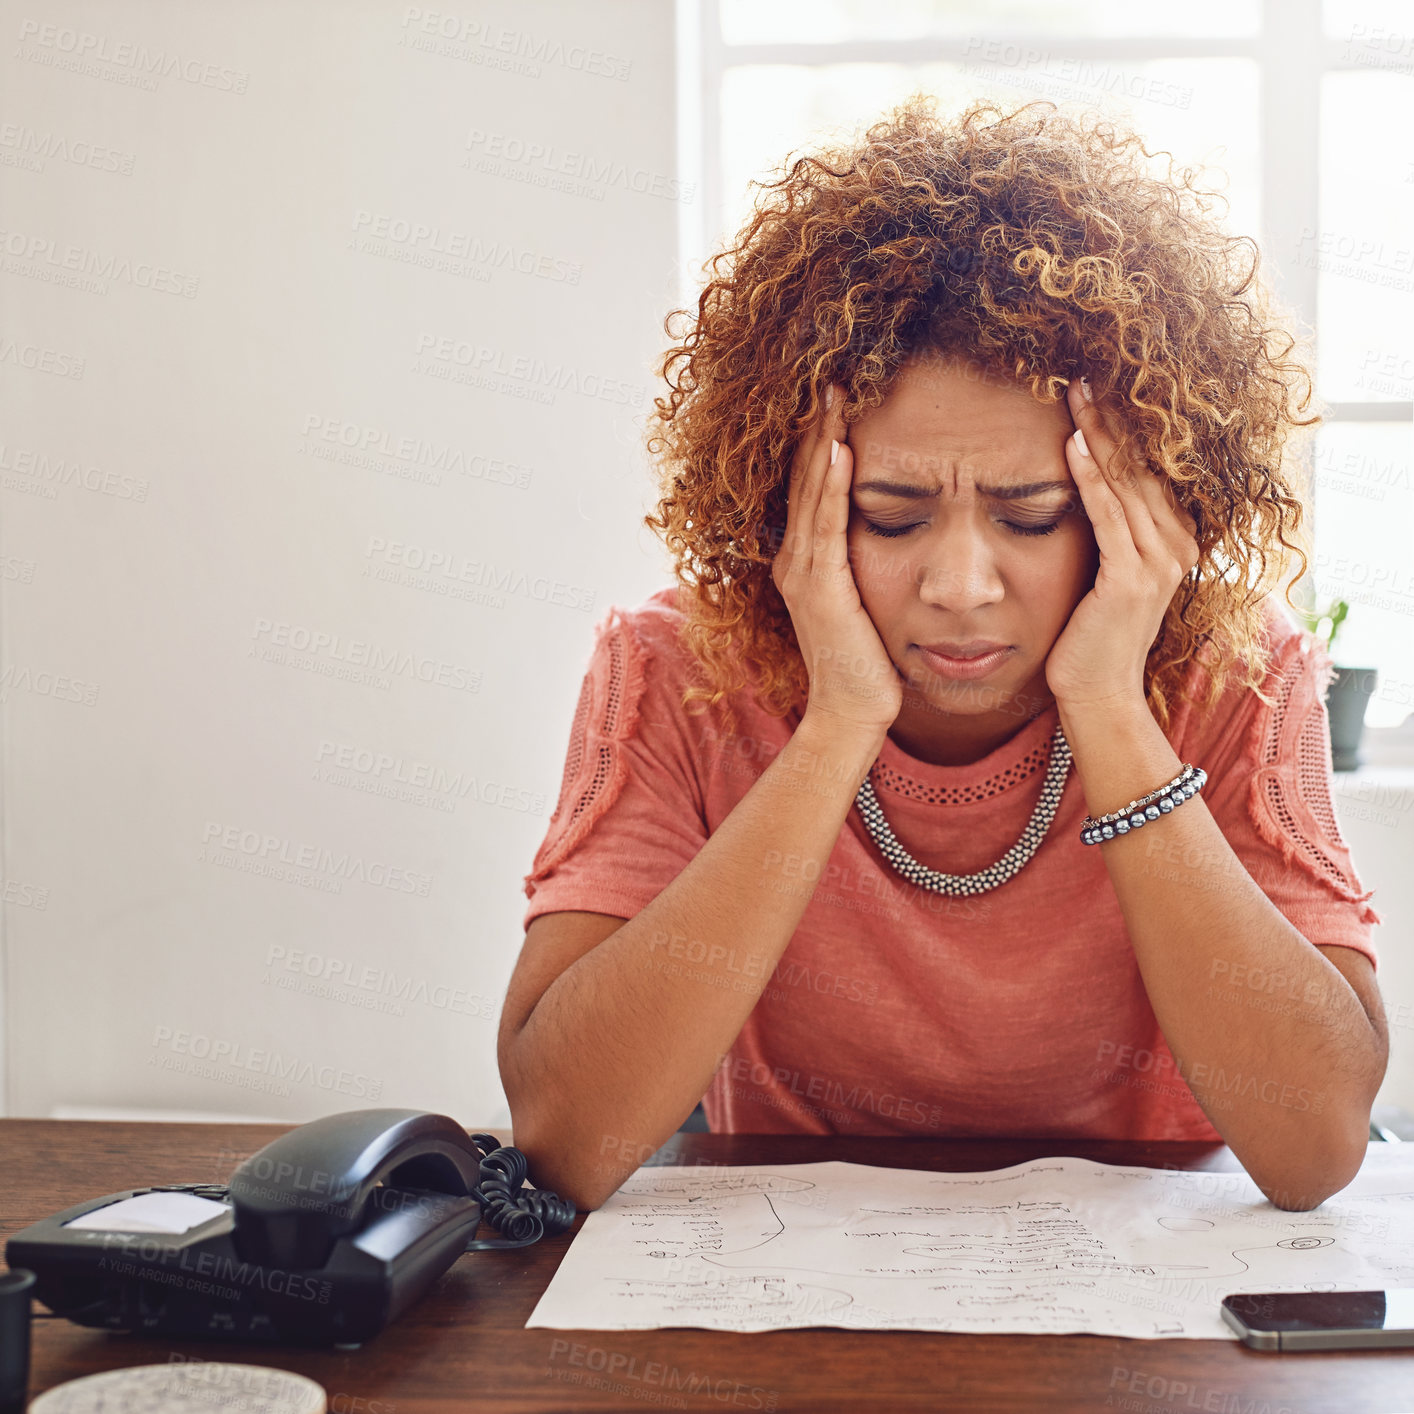 Buy stock photo Headache, documents or secretary with administration burnout, paperwork report or project deadline. Migraine pain, stress or frustrated woman at desk with research, agenda or human resources failure